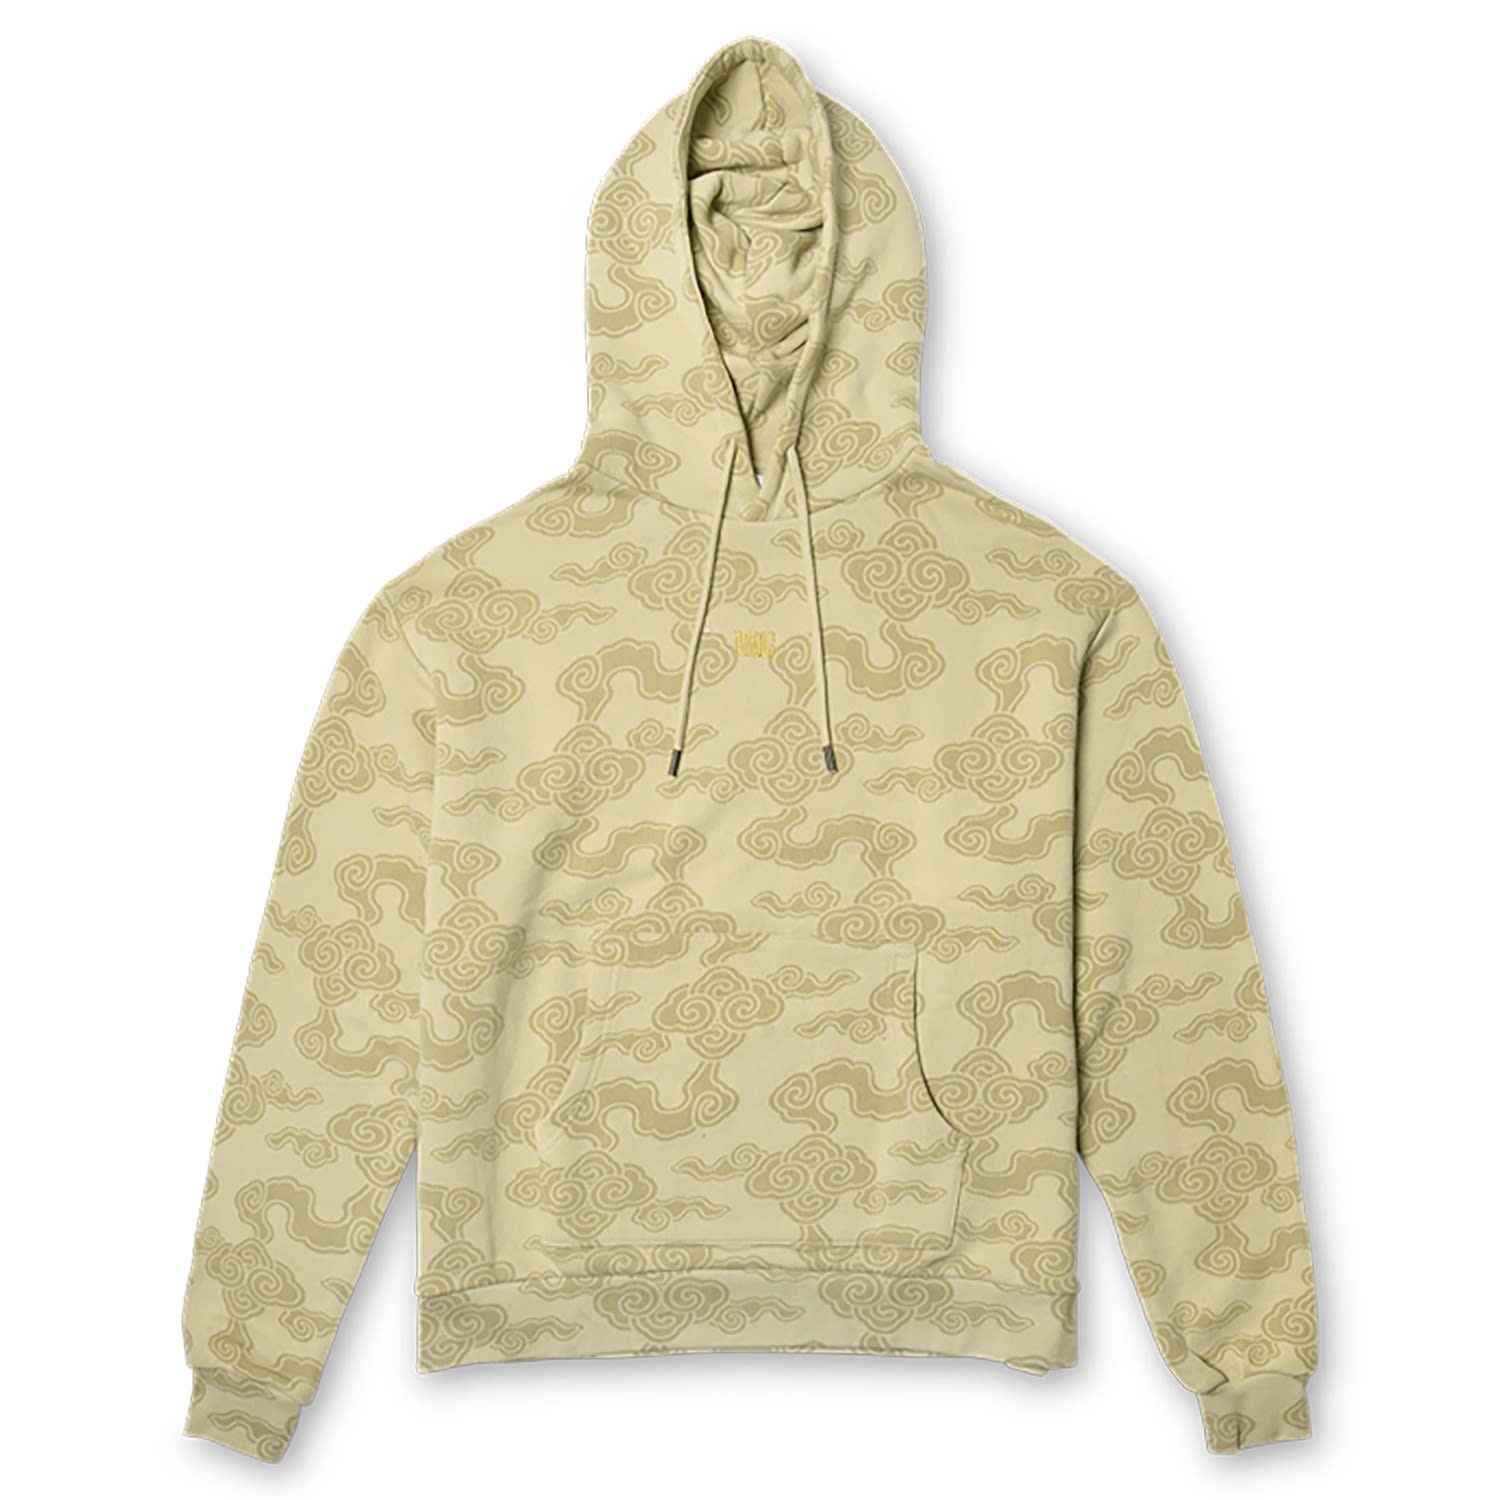 Men's Neutrals Super Cozy Cloud Print Hoodie In Stone Extra Small Ning Dynasty